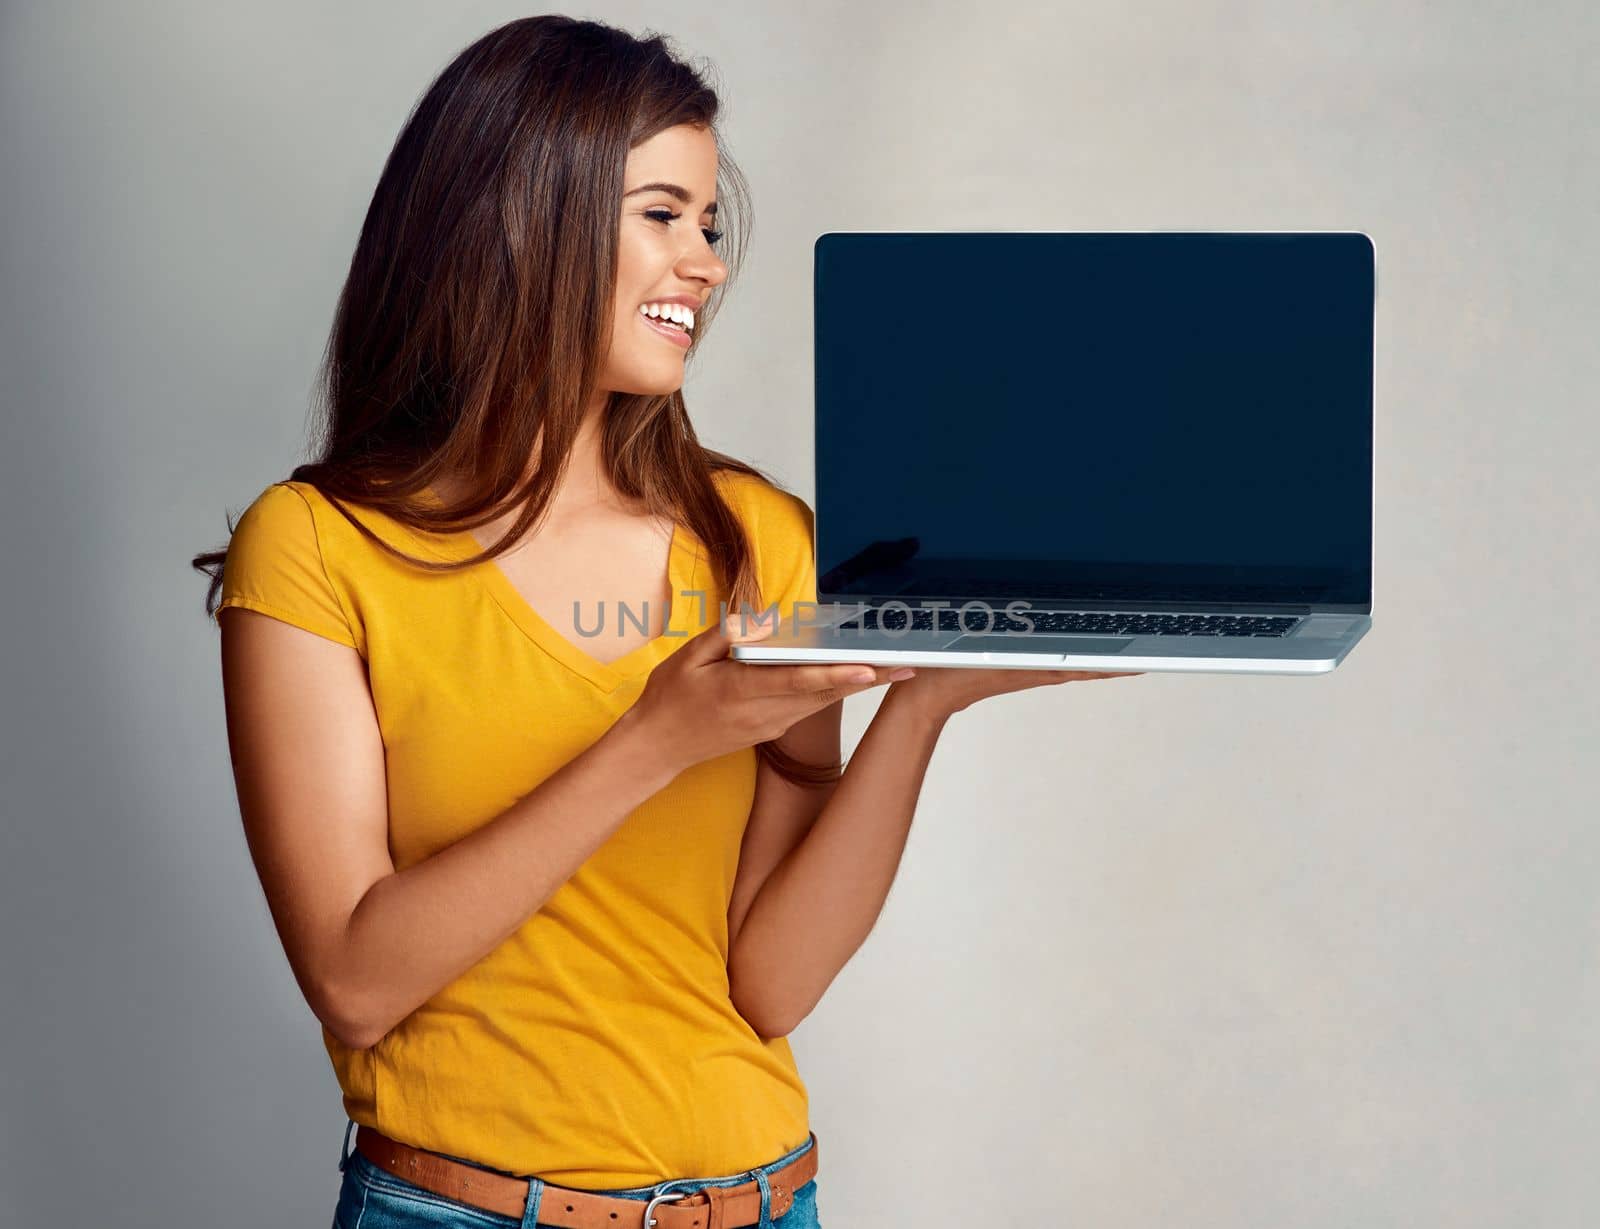 Be a part of something bigger online. Studio shot of an attractive young woman holding to a laptop with a blank screen against a grey background